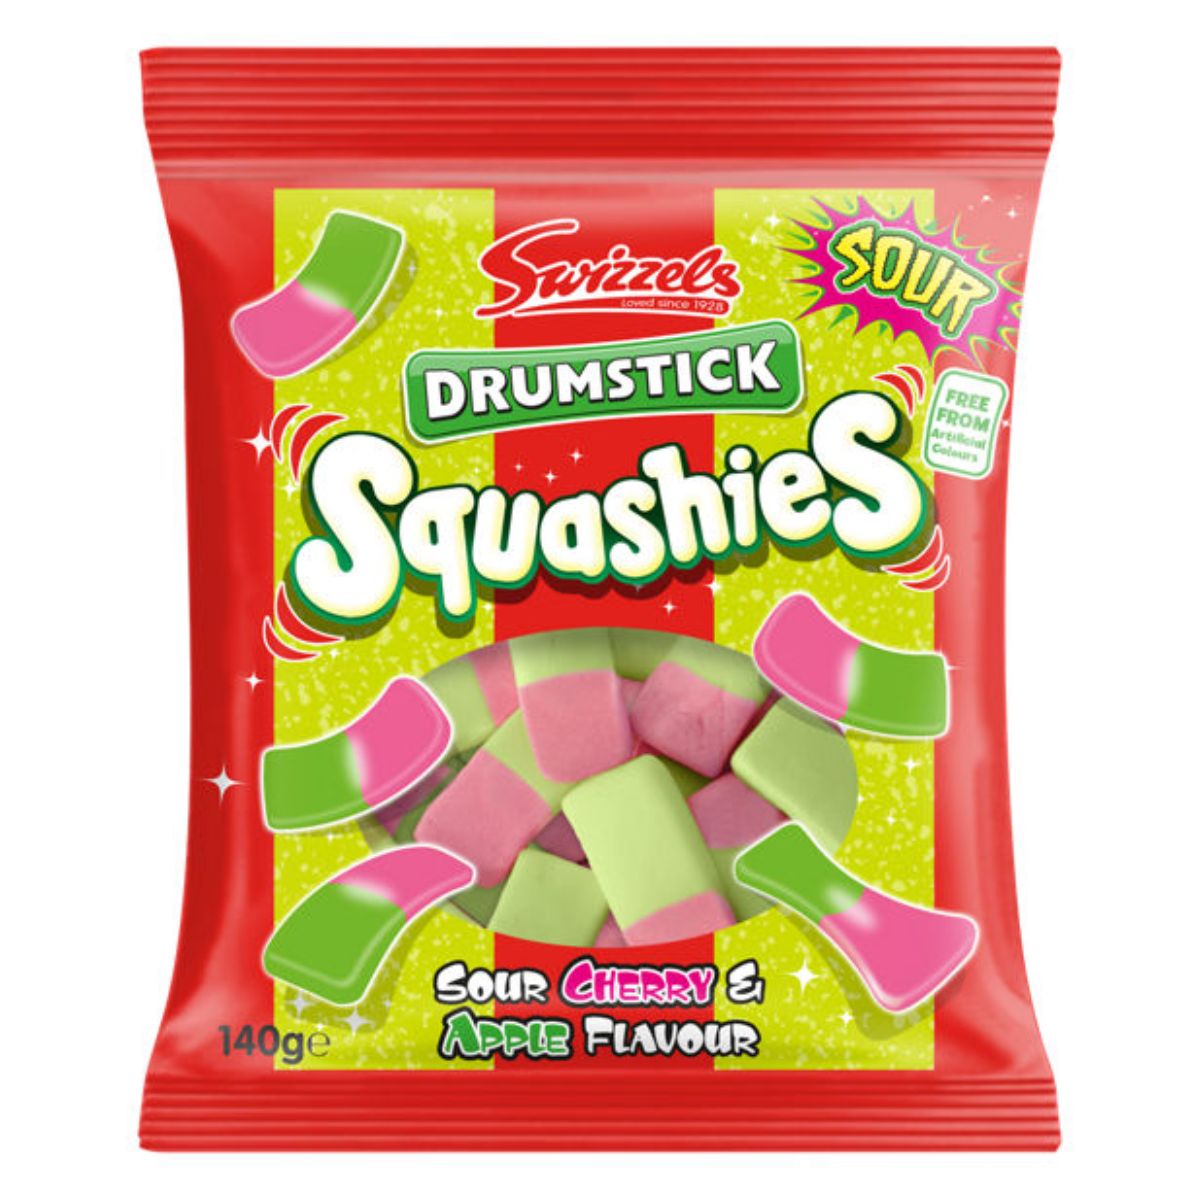 A pack of Swizzels - Drumstick Squashies Sour Cherry & Apple Flavour - 140g.